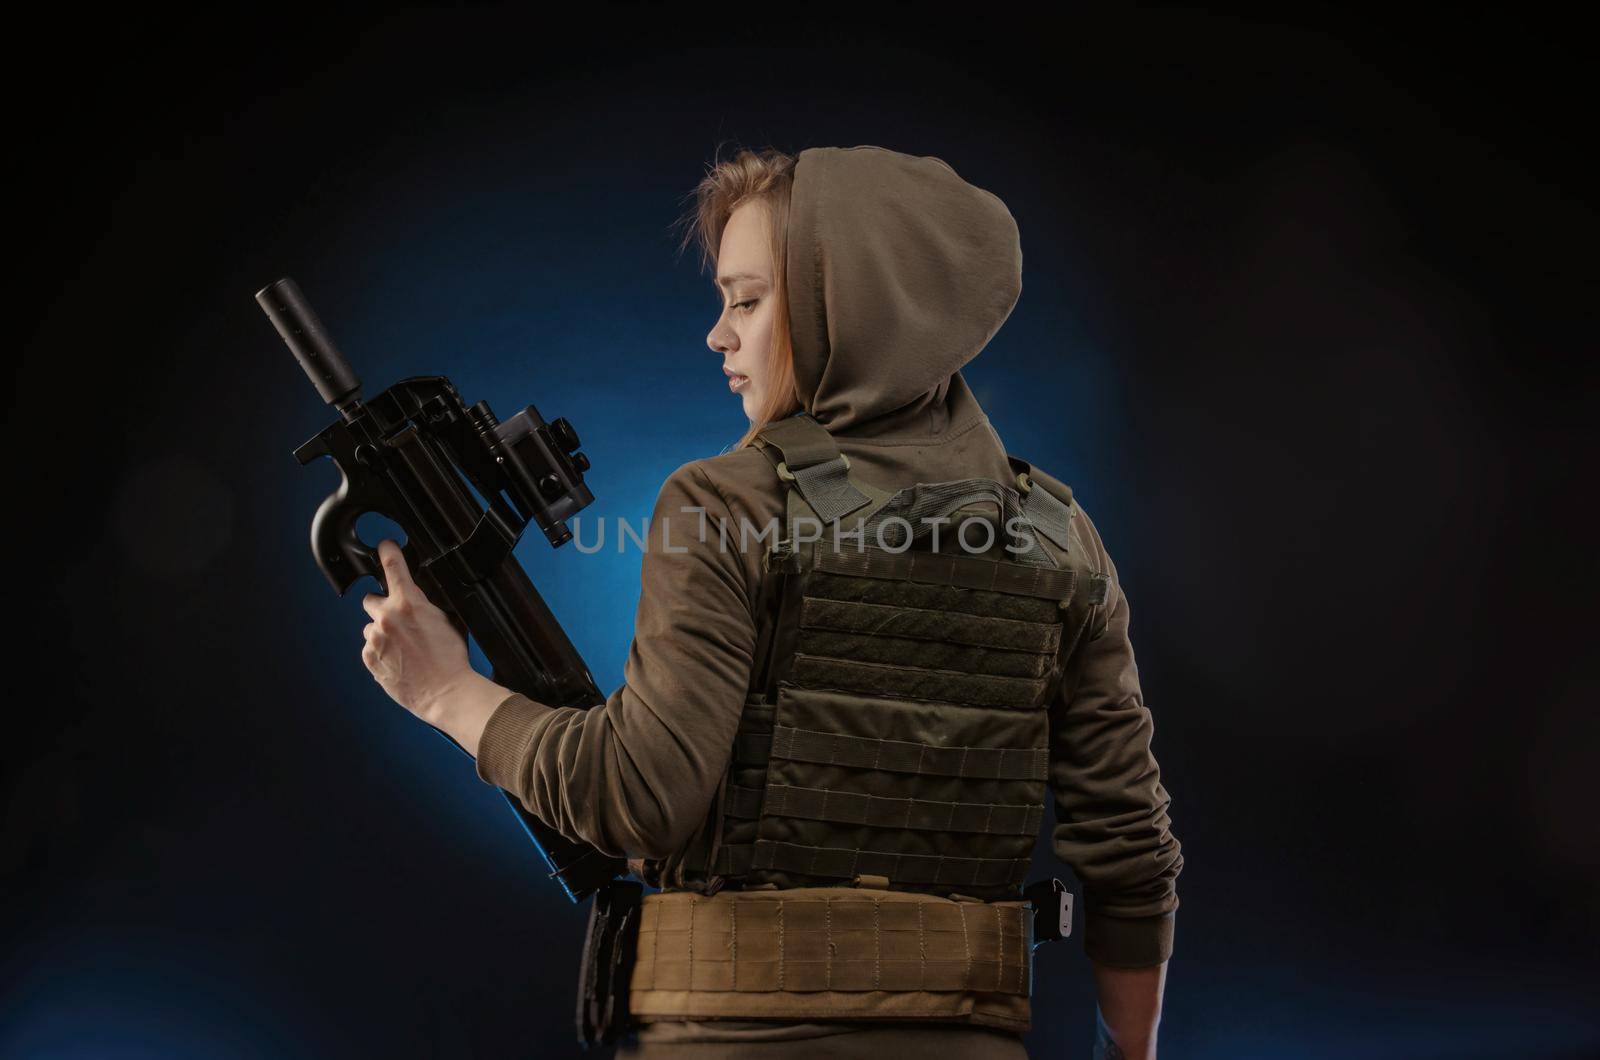 the girl in military overalls airsoft posing with a gun in his hands on a dark background by Rotozey